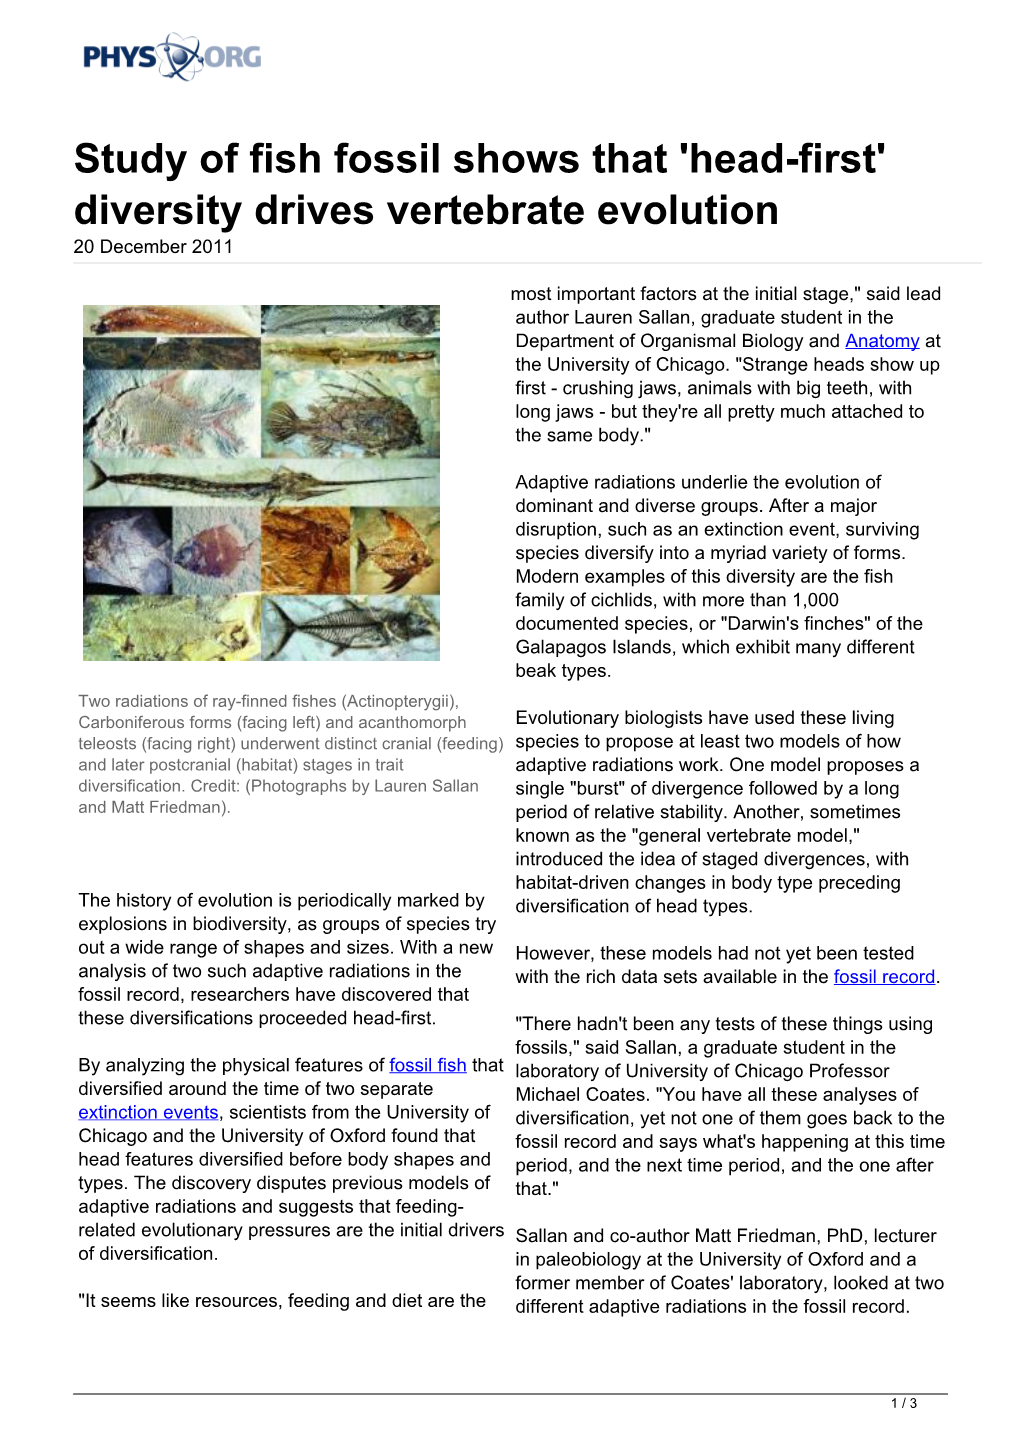 Study of Fish Fossil Shows That 'Head-First' Diversity Drives Vertebrate Evolution 20 December 2011